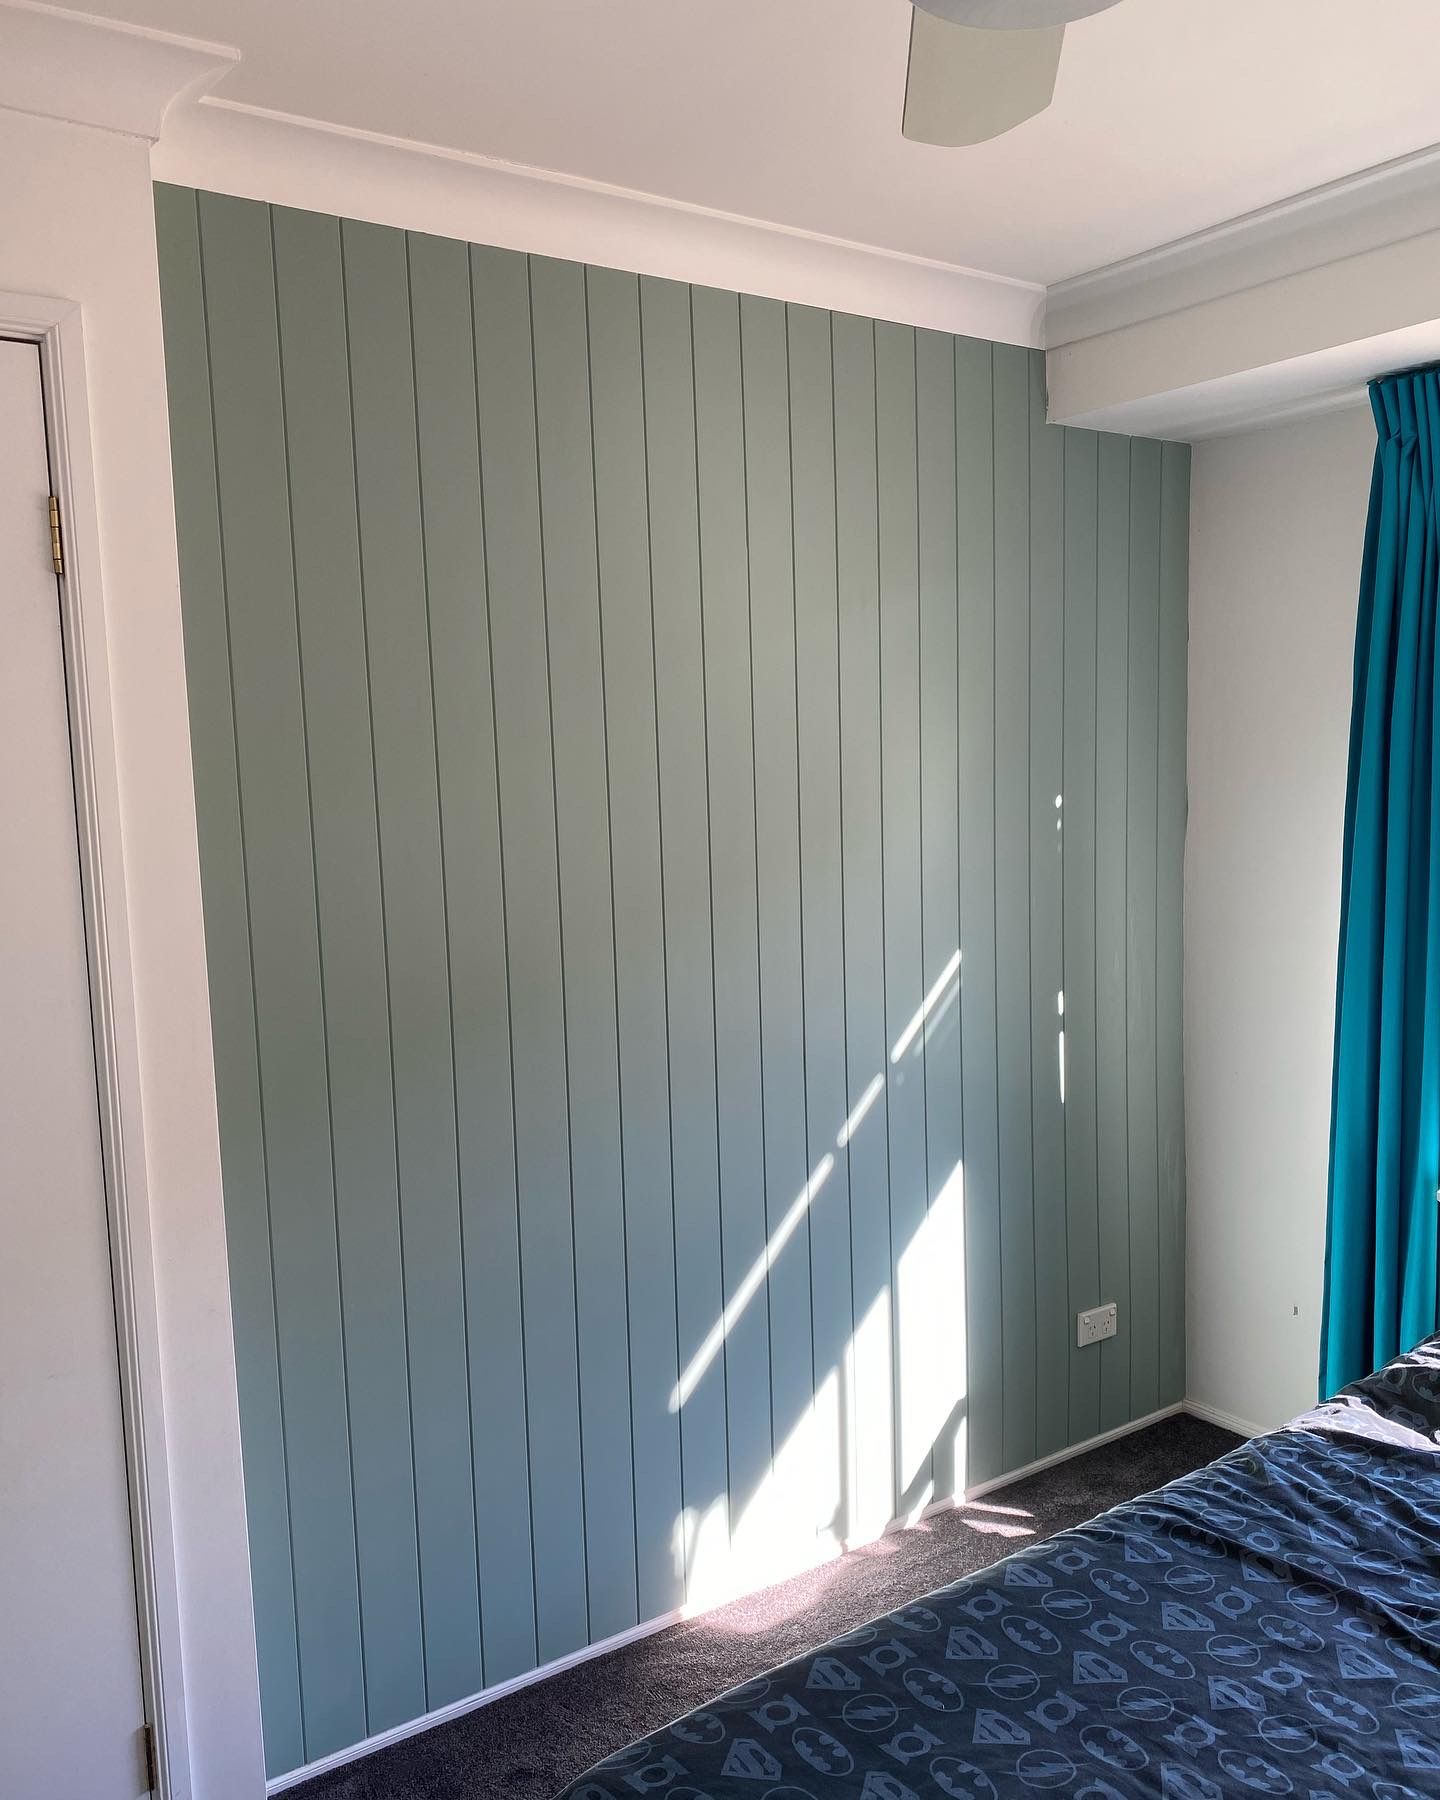 VJ panelling feature wall | Bunnings Workshop community